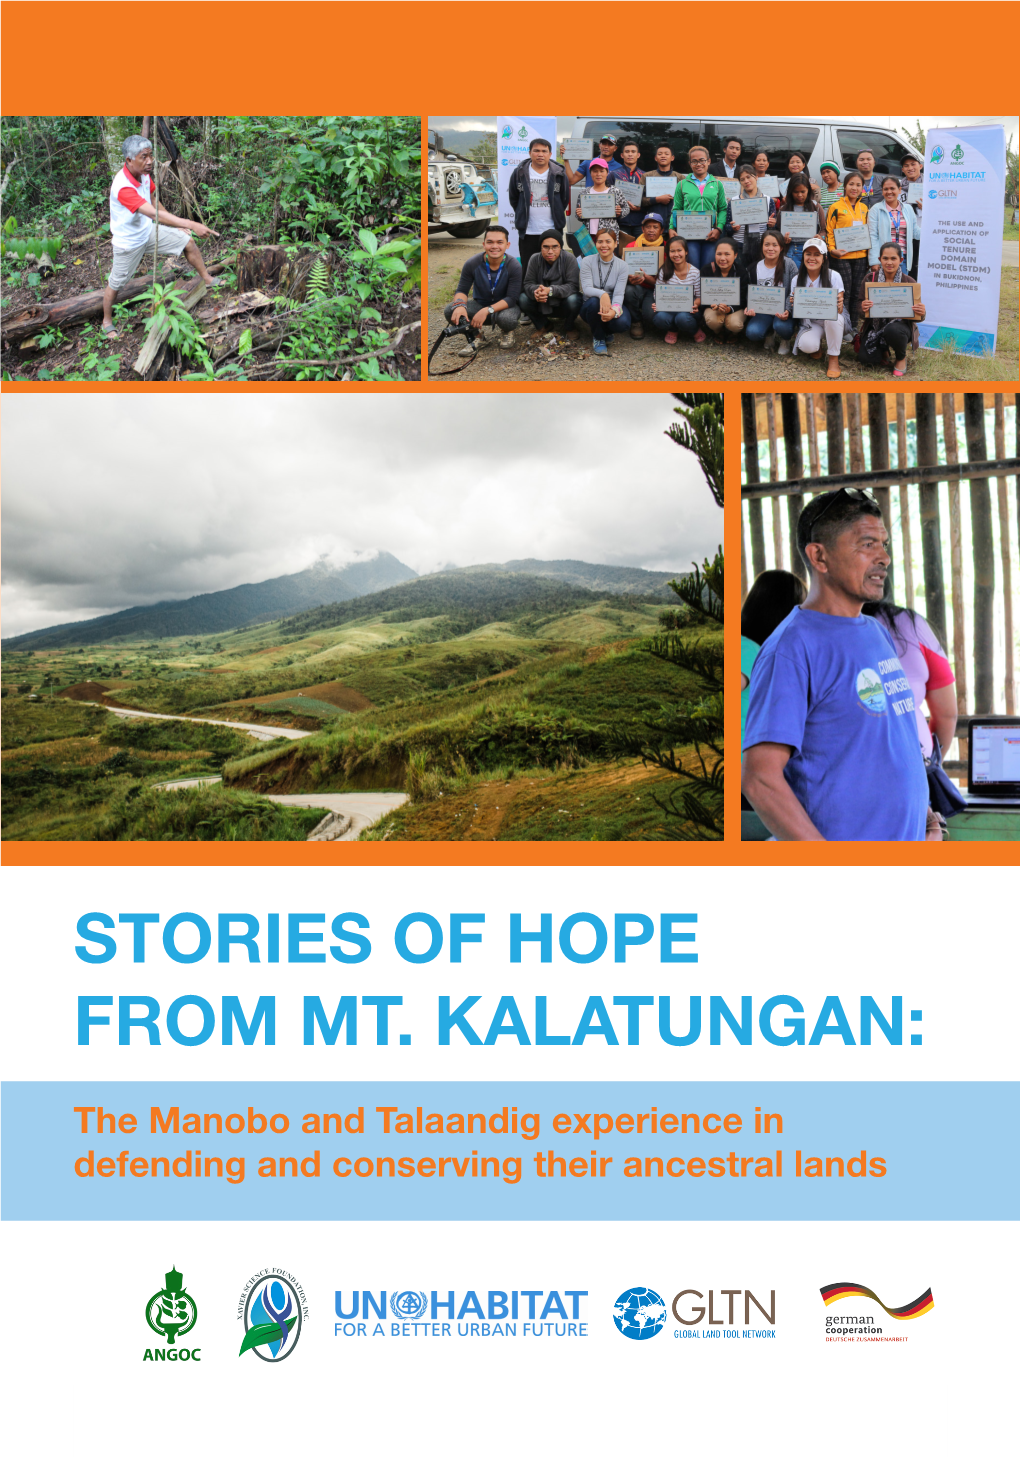 STORIES of HOPE from MT. KALATUNGAN: the Manobo and Talaandig Experience in Defending and Conserving Their Ancestral Lands